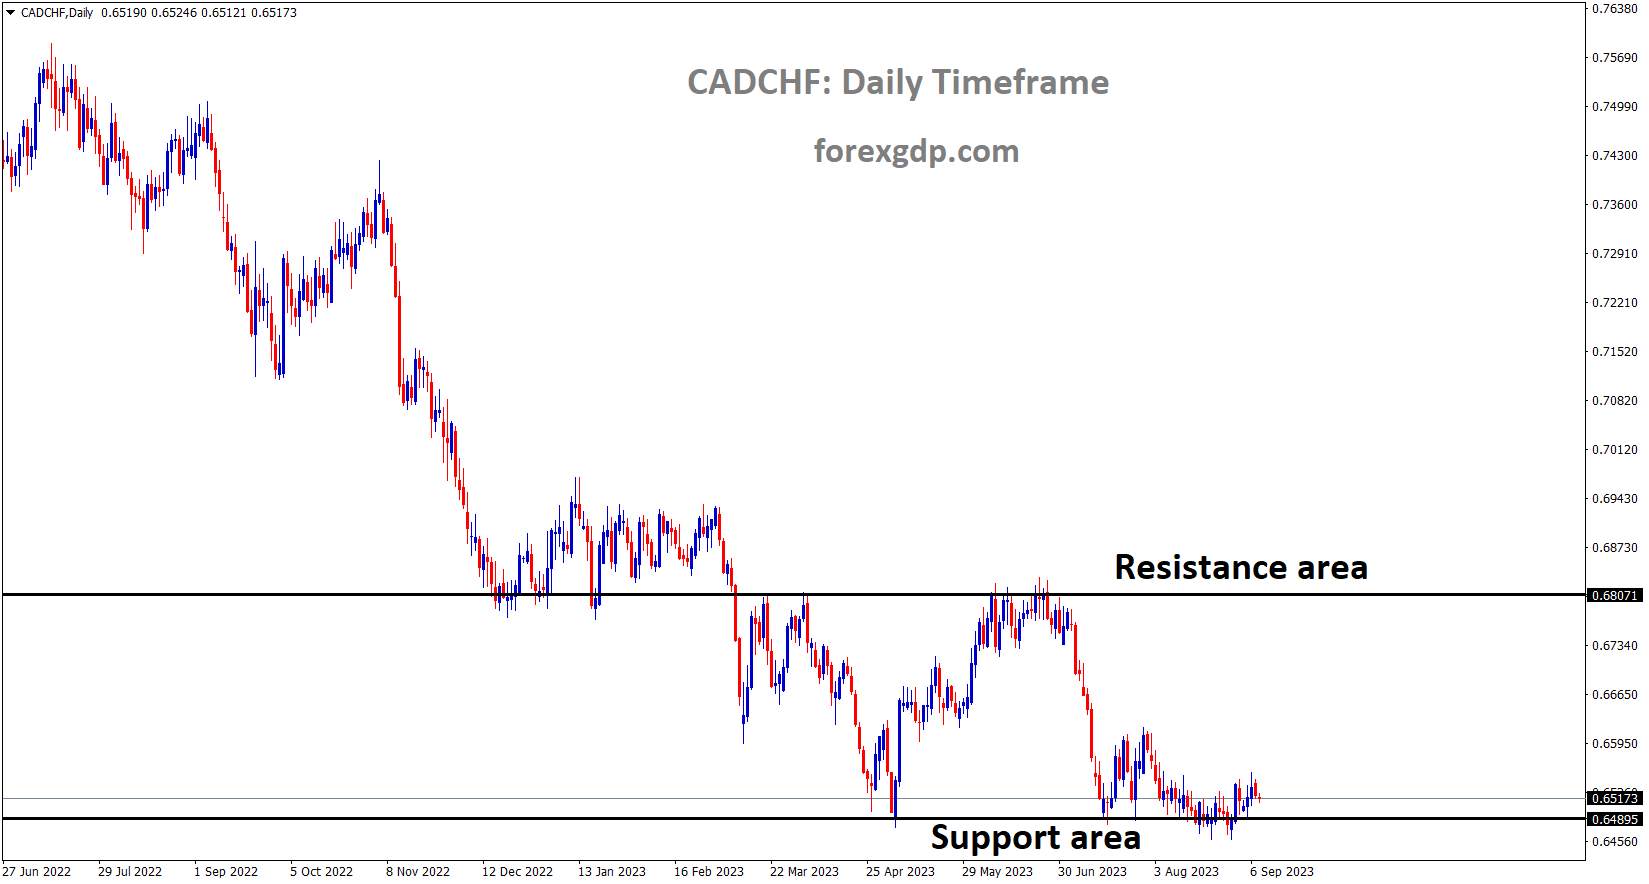 CADCHF is moving in the Box pattern and the market has rebounded from the horizontal support area of the pattern